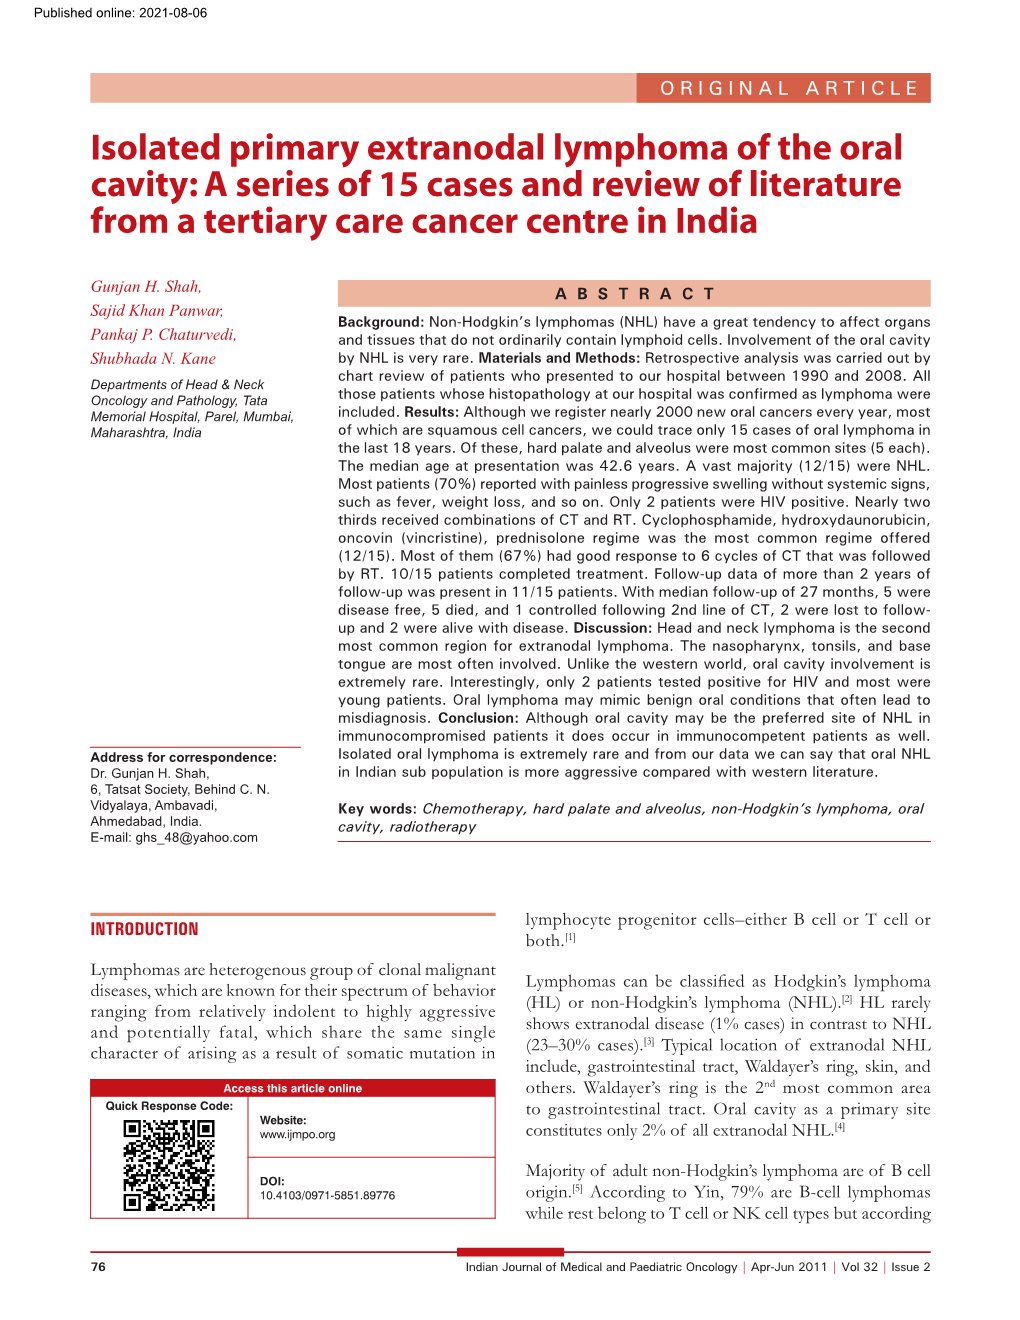 Isolated Primary Extranodal Lymphoma of the Oral Cavity: a Series of 15 Cases and Review of Literature from a Tertiary Care Cancer Centre in India